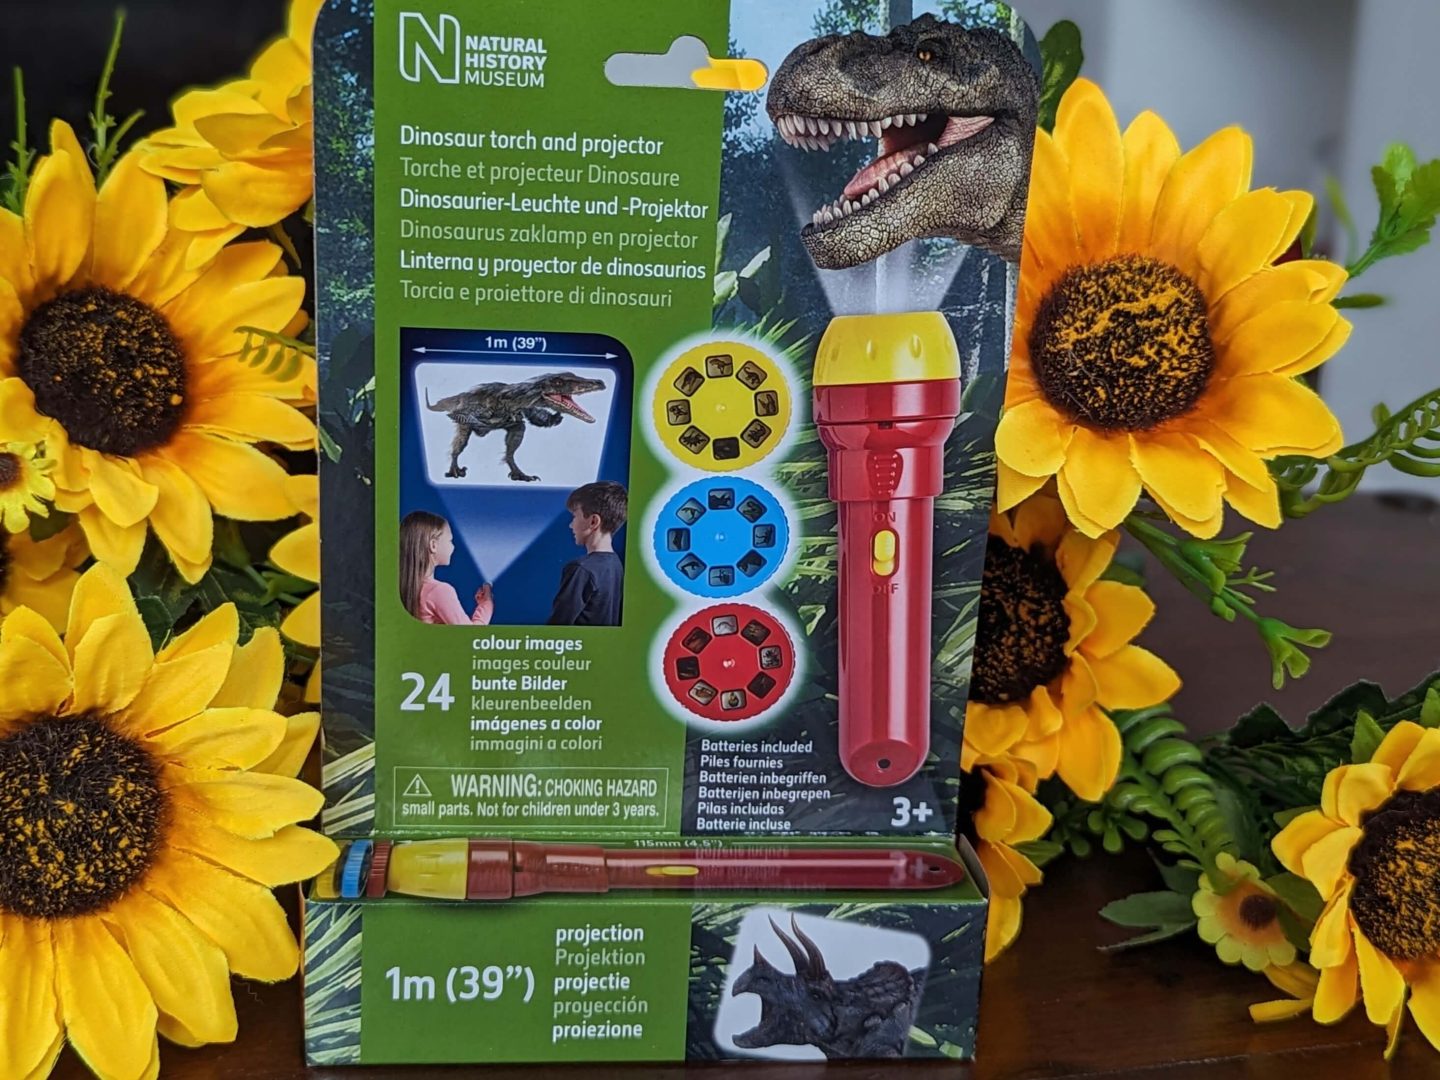 Dinosaur torch and projector stocking filler displayed in packaging against a bunch of sunflowers